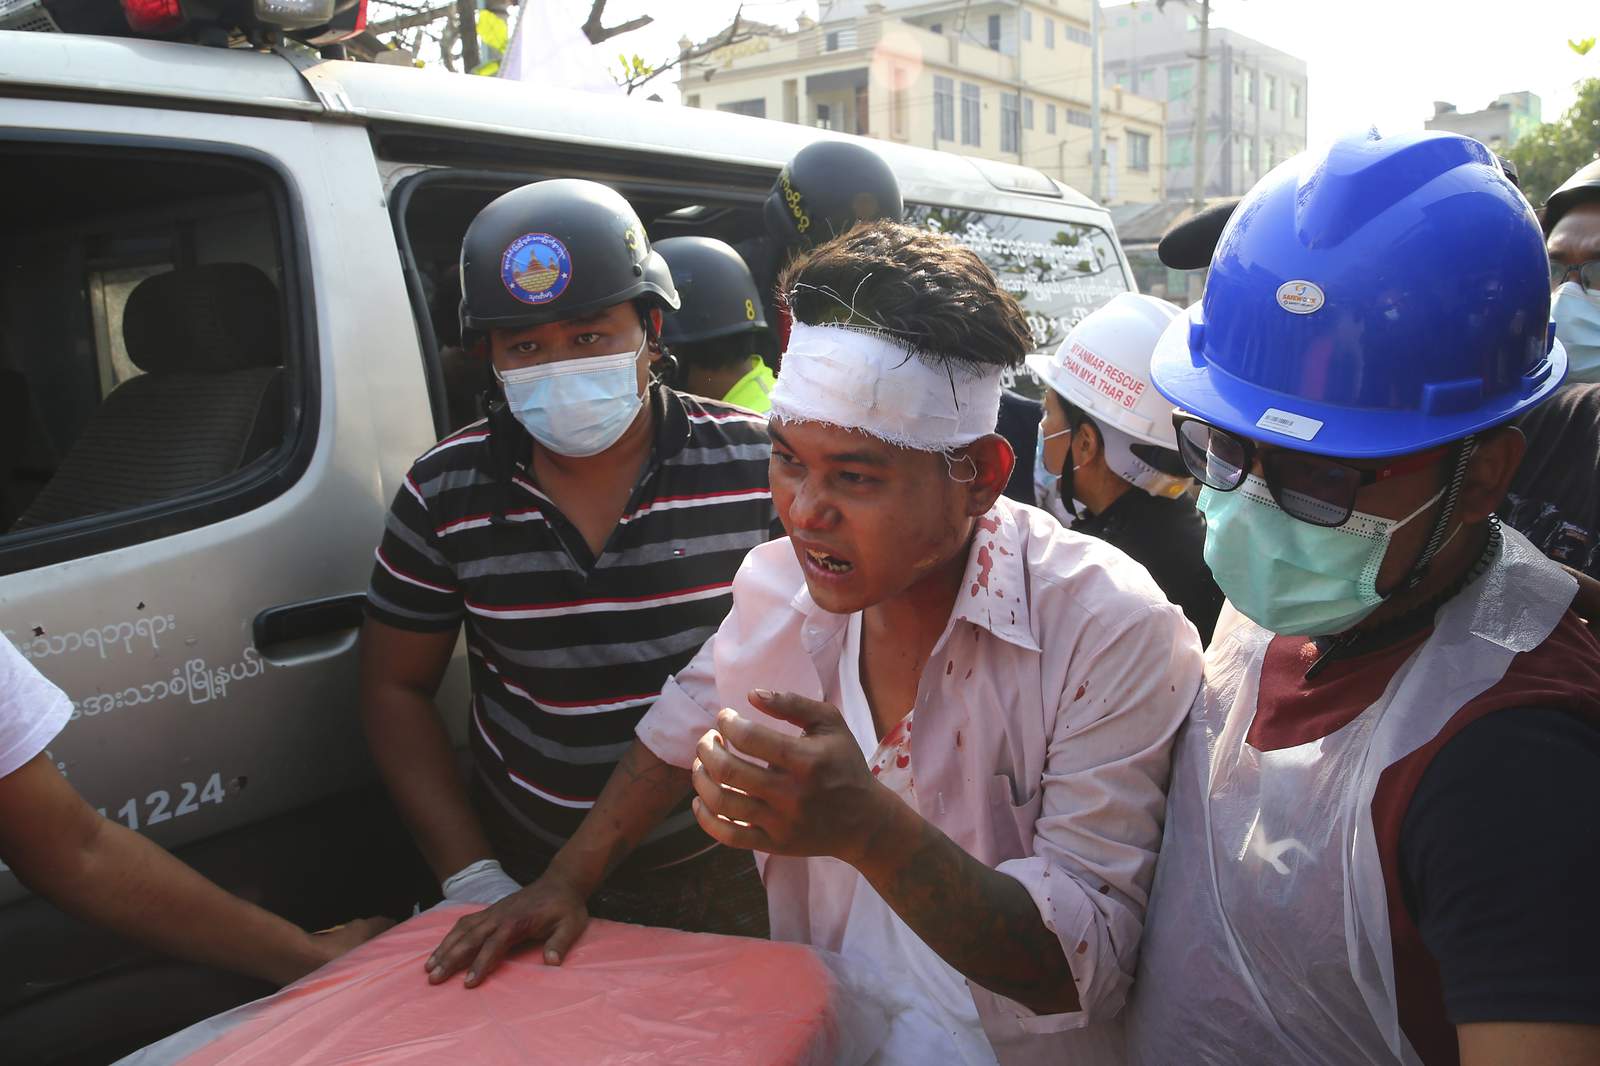 Myanmar protesters injured as police escalate use of force